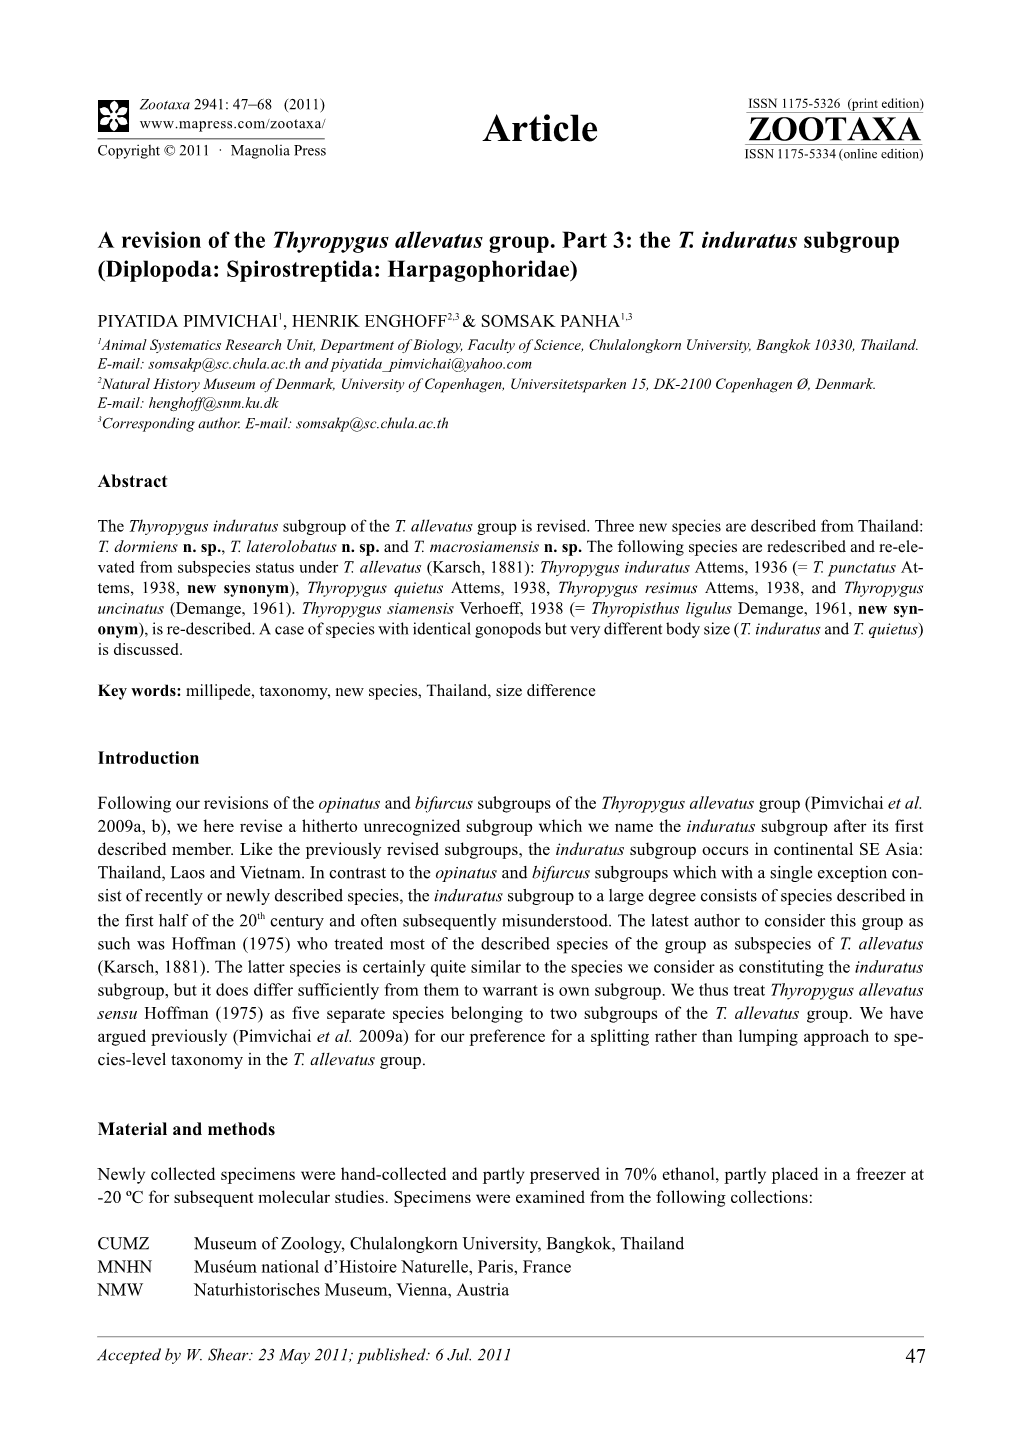 A Revision of the Thyropygus Allevatus Group. Part 3: the T. Induratus Subgroup (Diplopoda: Spirostreptida: Harpagophoridae)